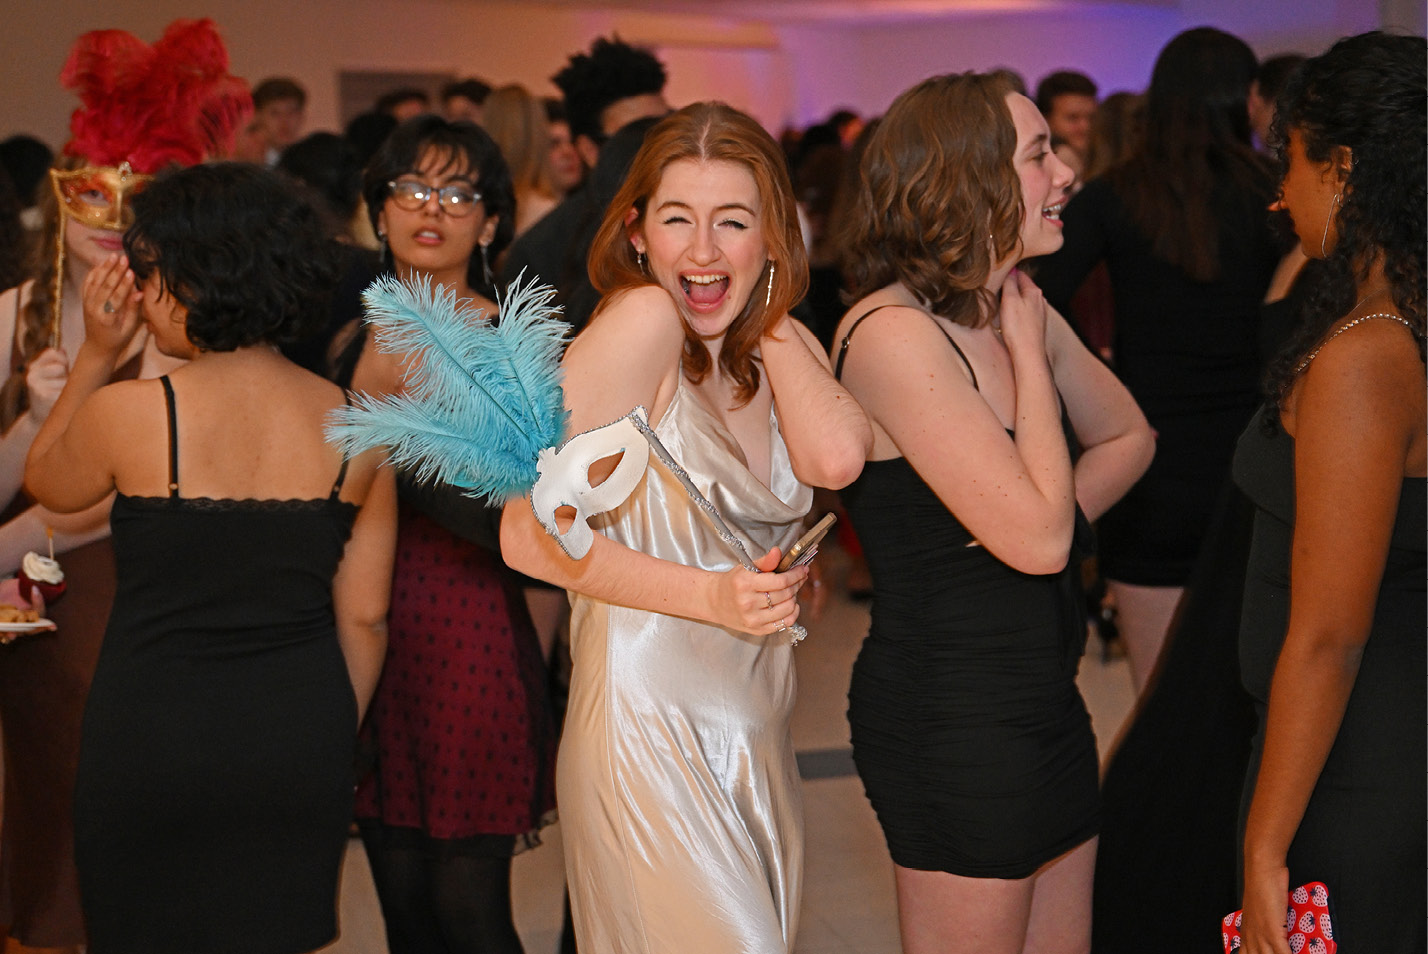 A student smiles at the winter formal masquerade ball sponsored by the Student Activities Council in the 1962 Room.